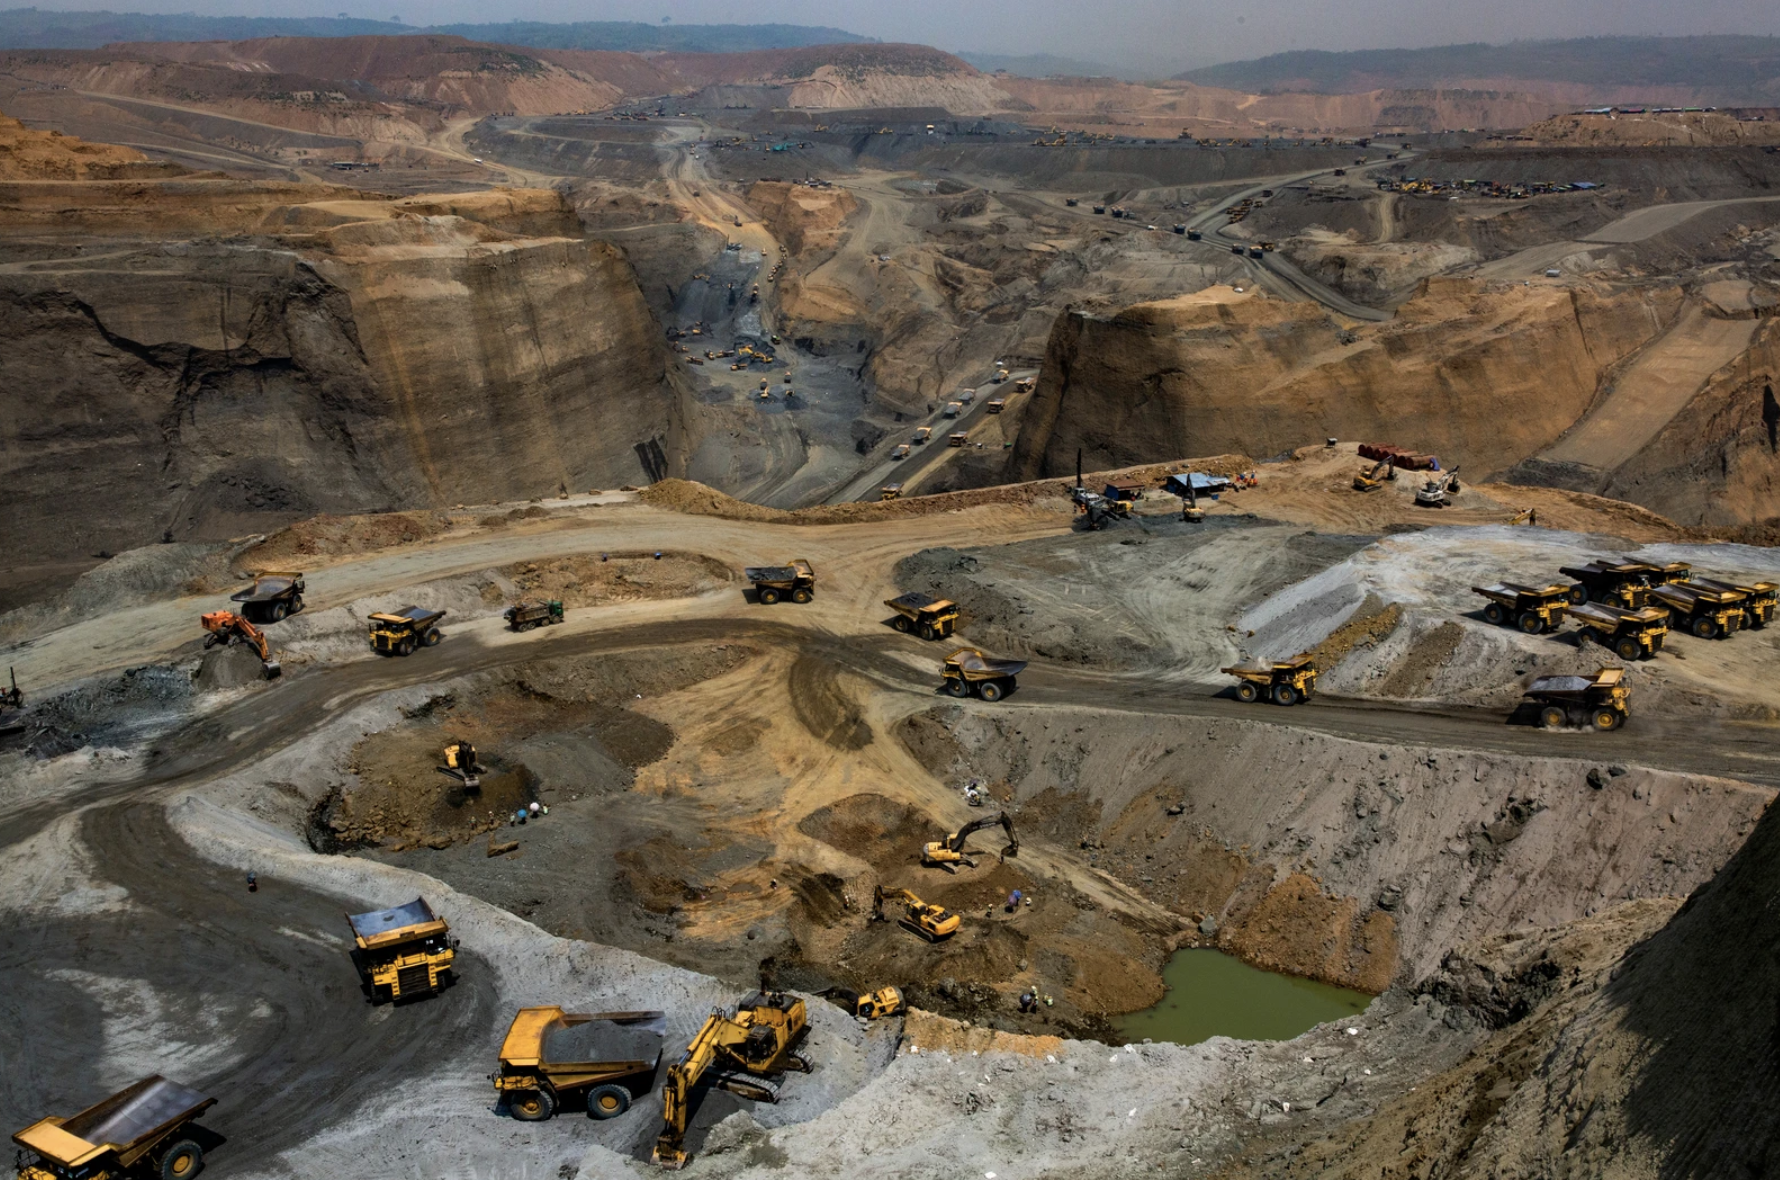 Company trucks operating at a government-licensed jade mining site in Hpakant, Kachin State, Myanmar on May 17, 2019. Image by Hkun Lat. Myanmar, 2019.